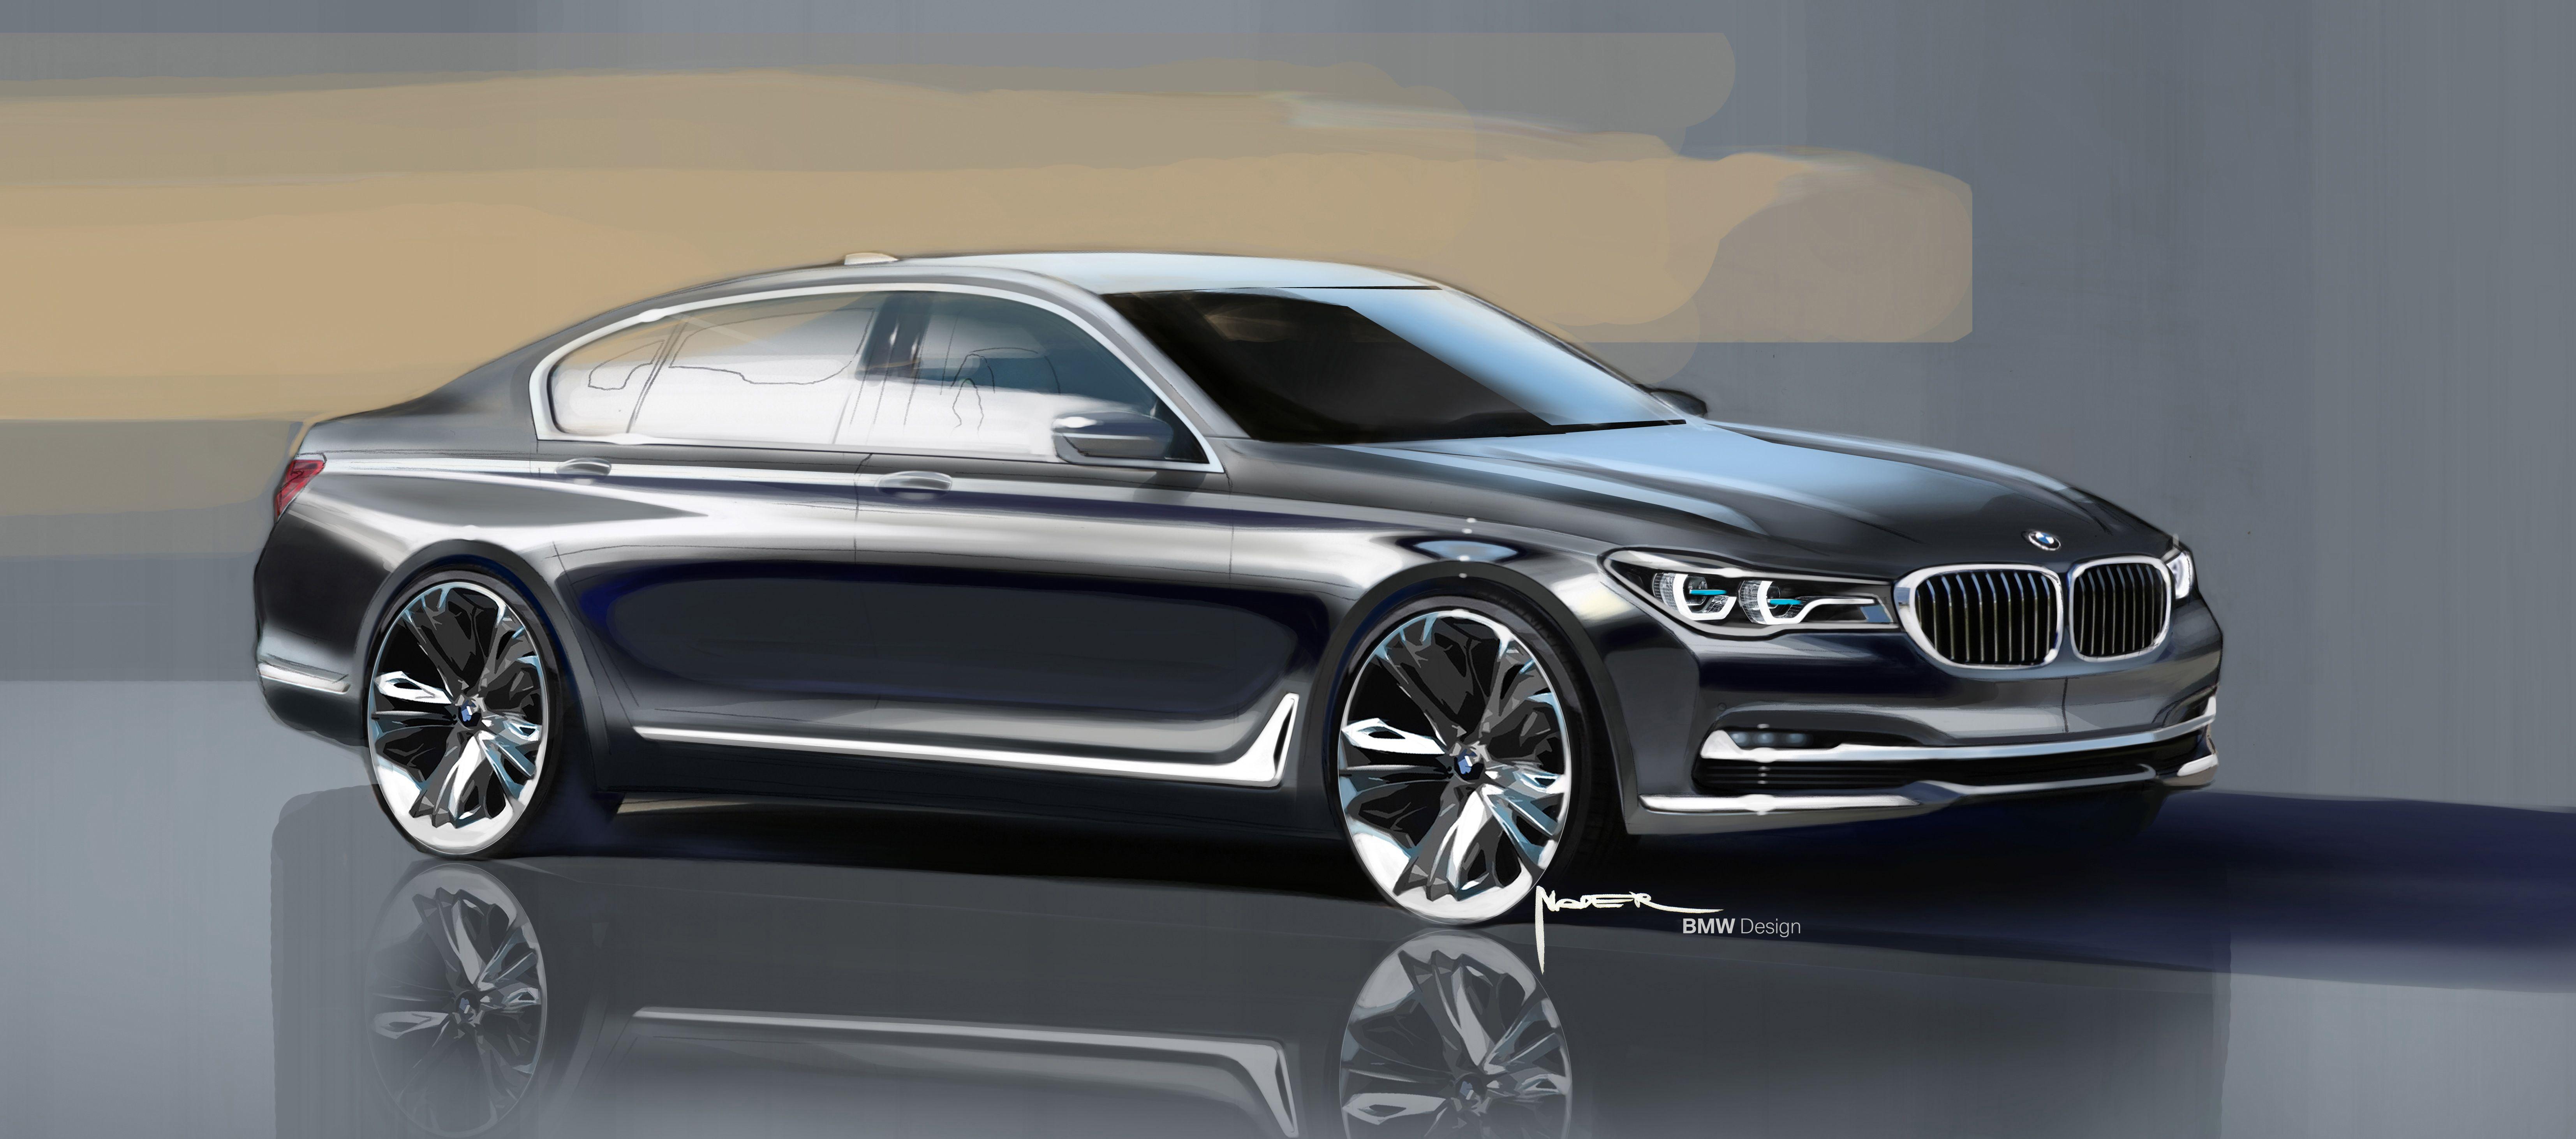 BMW 7 Series Wallpaper and Videos Want to Pull You Into a